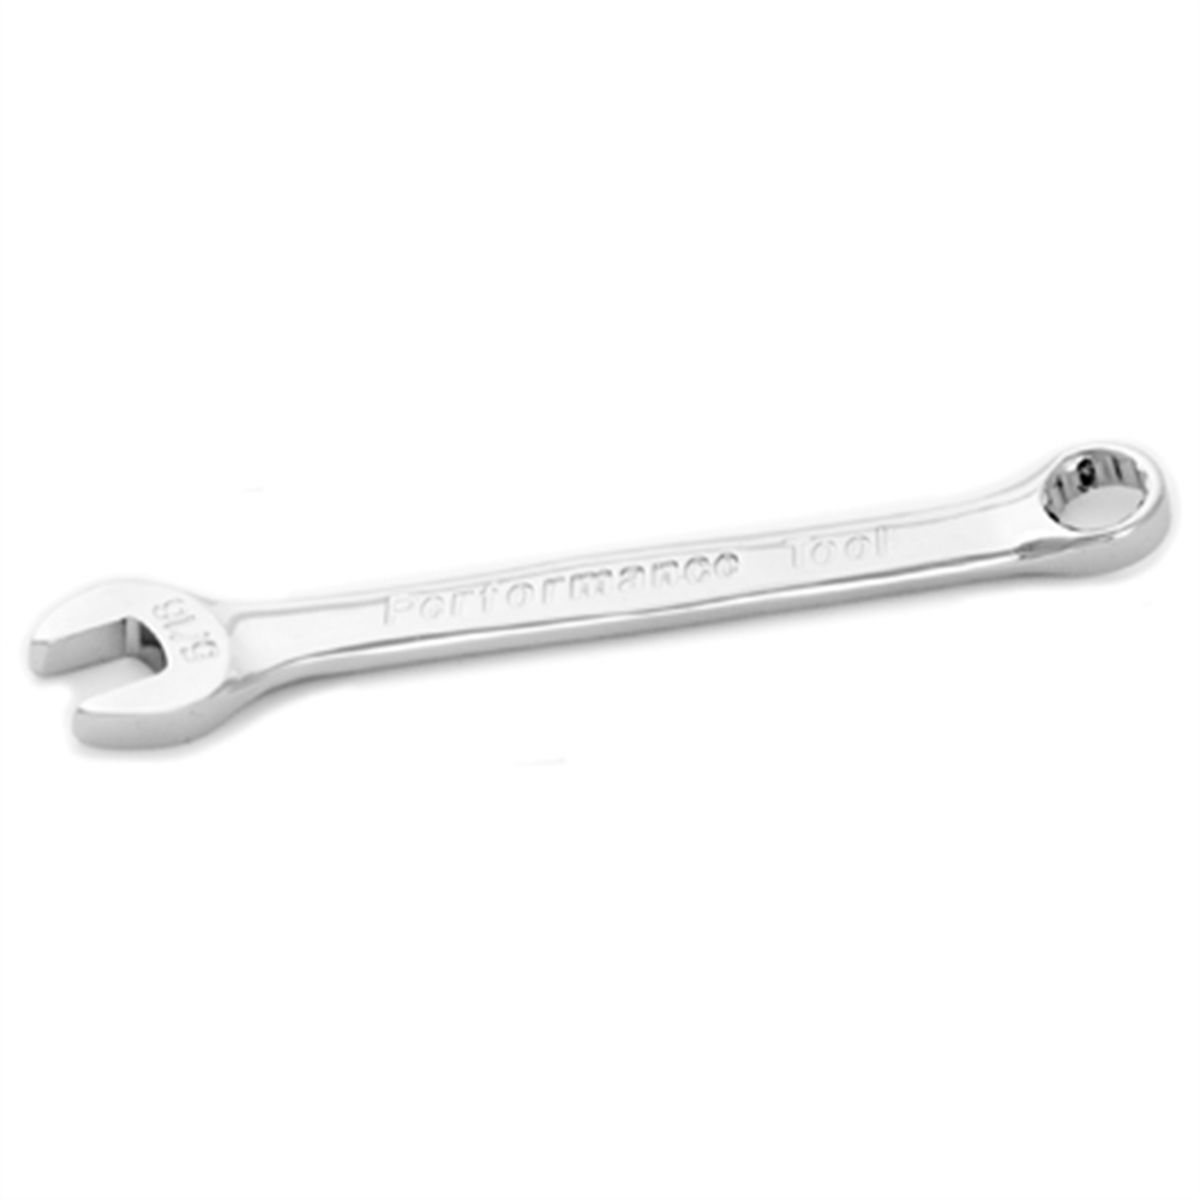 5/16" Combination Wrench